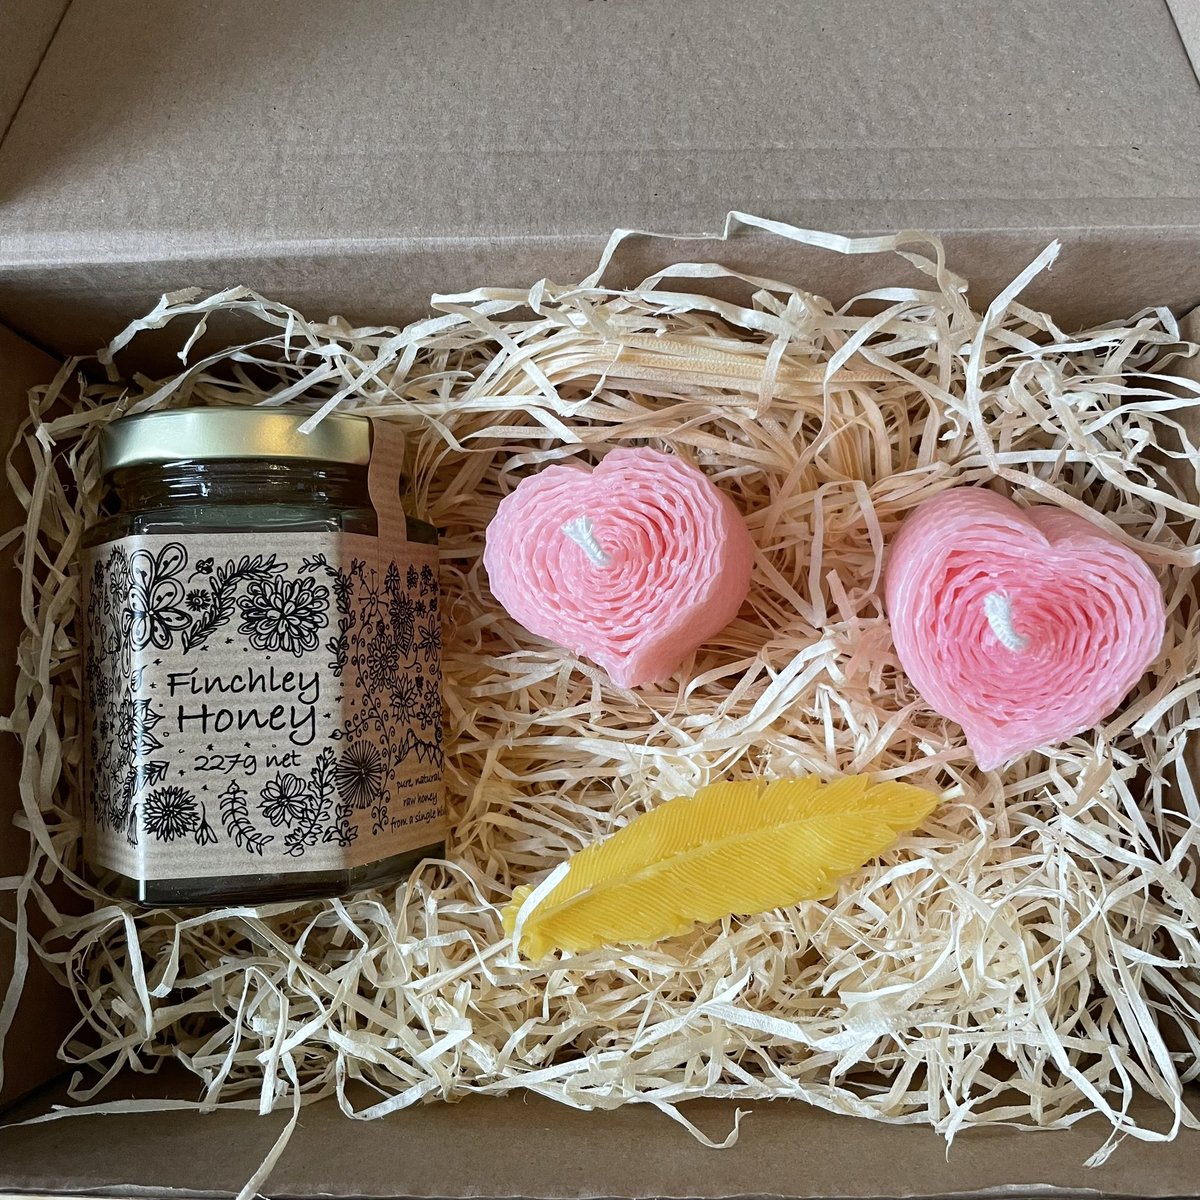 Our Valentine’s gift boxes make an unusual, romantic and sustainable alternative to roses. 

They are packed in recyclable boxes, paper and wood shavings - no plastic here! 

#ecofriendly #ecogift #sustainable #sustainablevalentines #localbusiness #bethechange